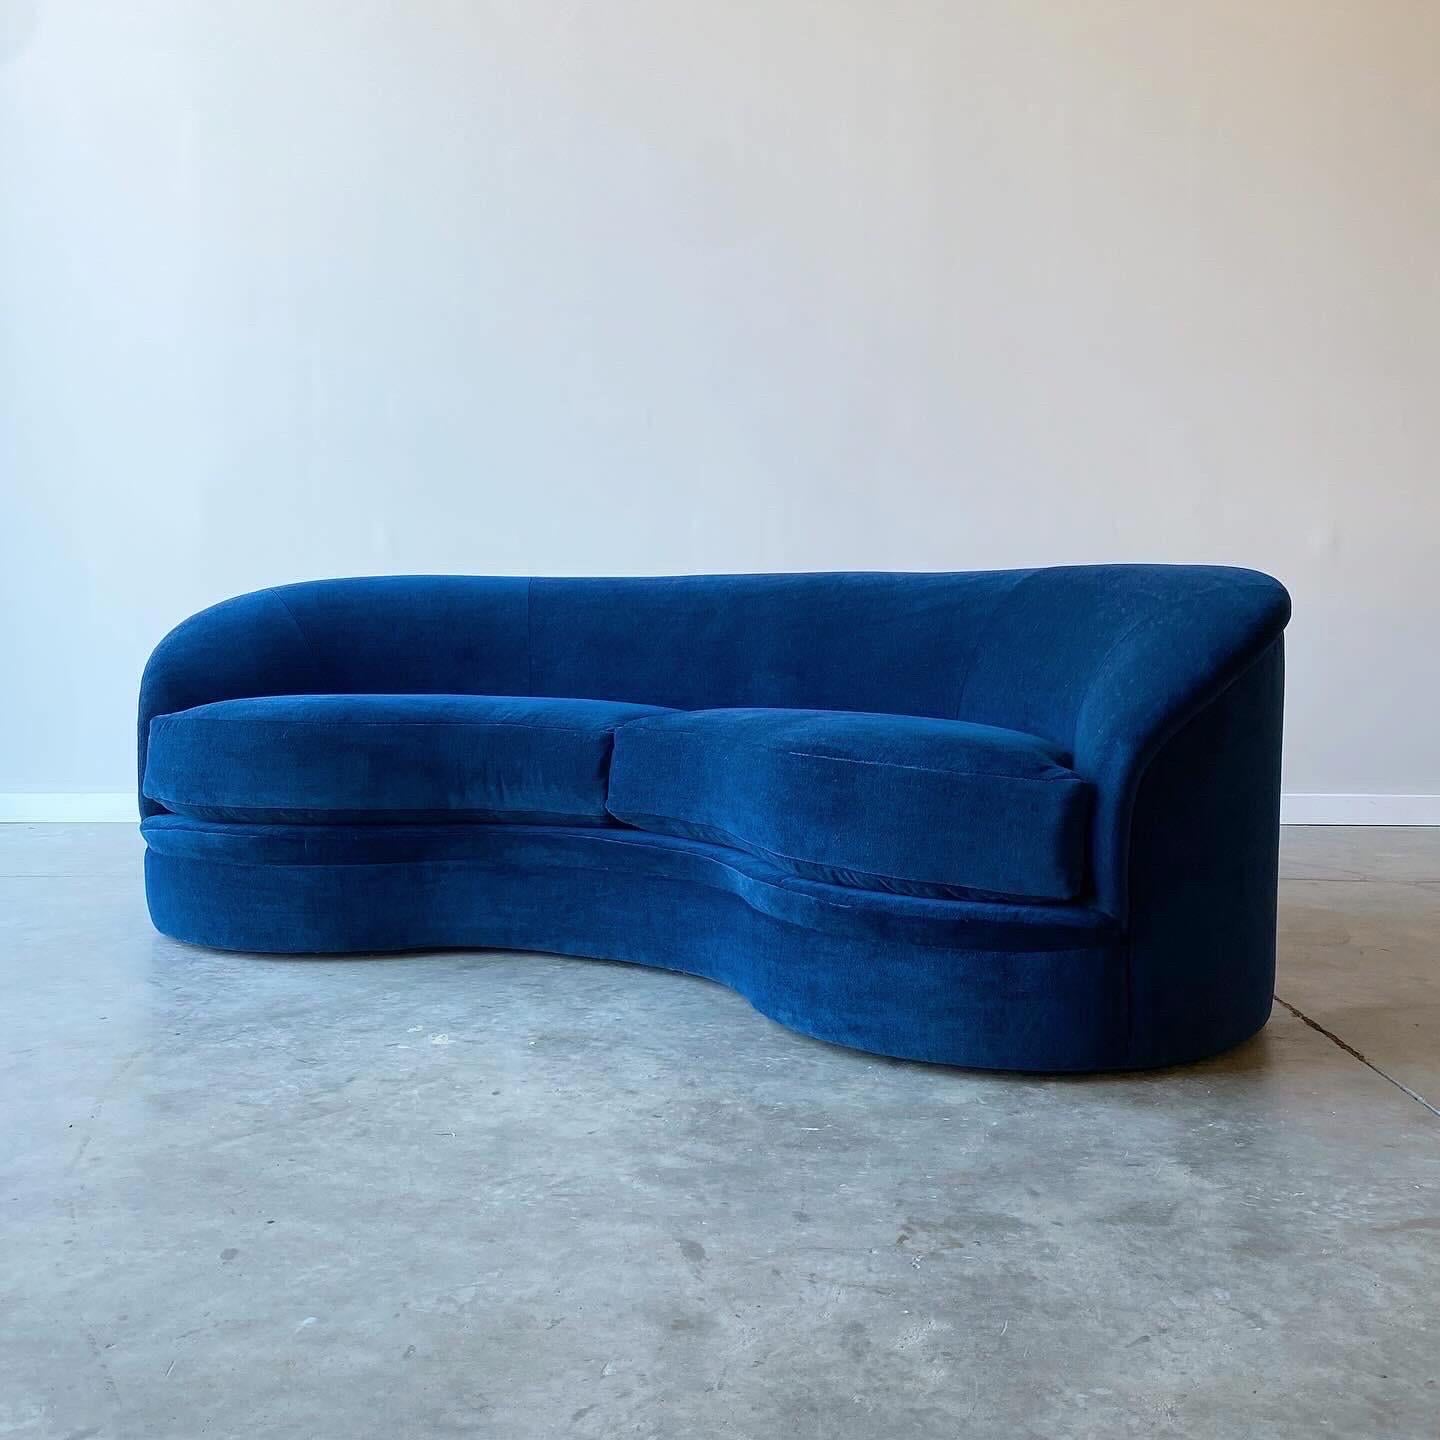 Classic curved form to this luxurious sofa.  Made by Directional in the 1980s and newly upholstered in midnight blue mohair.  Very comfortable sit with heavy cushions and deep seat.  

Note the upholstery shows a touch darker in person than in the